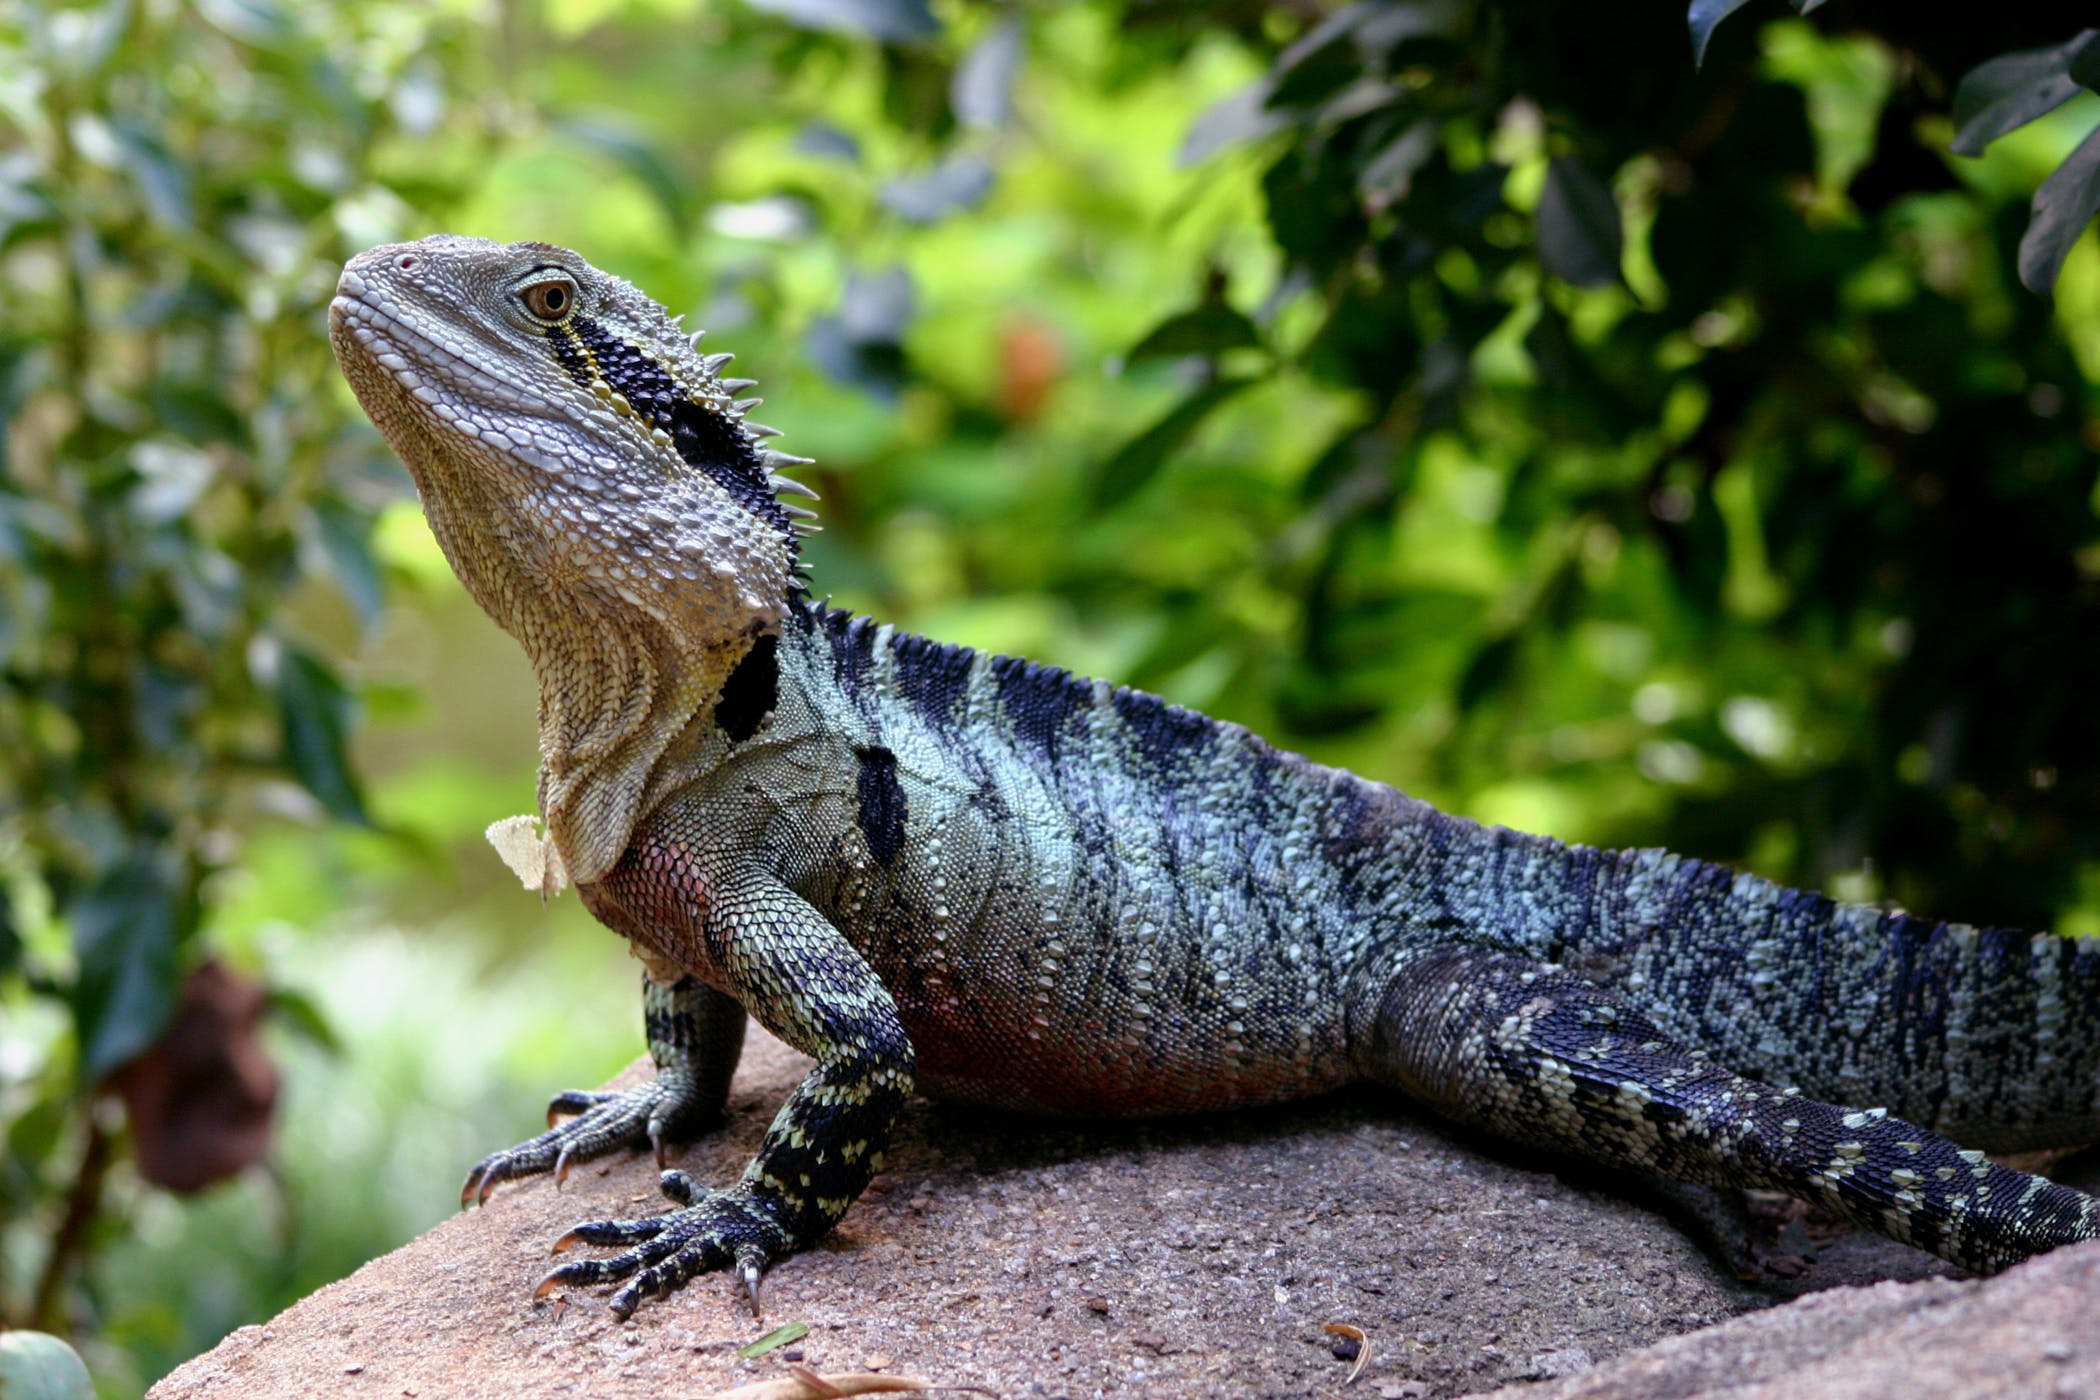 Abscesses in Reptiles - Symptoms, Causes, Diagnosis, Treatment ...